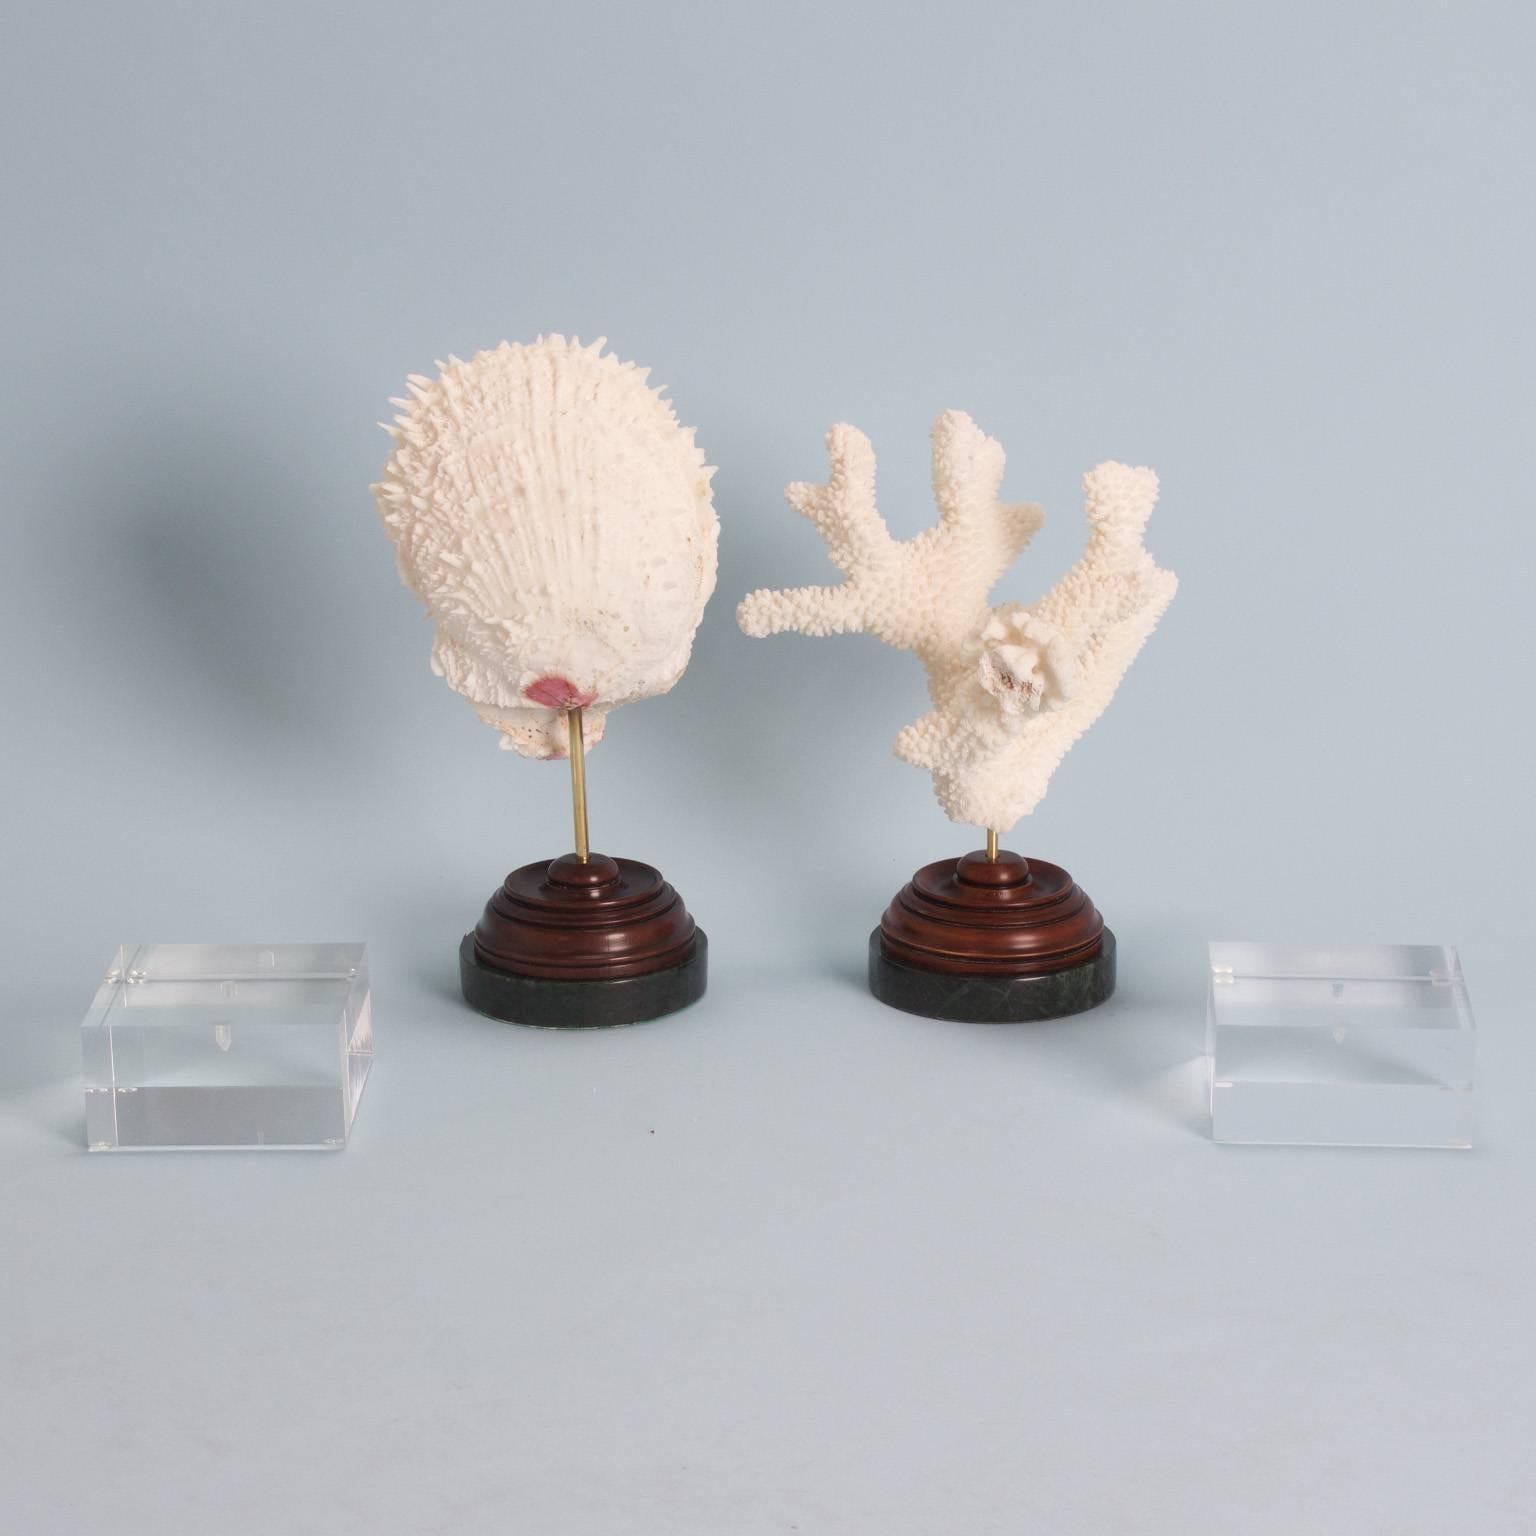 Two spirited sea life specimens; an ancient encrusted shell and a branch coral fragment, both with optional bases of Lucite or wood and marble.

From left to right:

Measures: Ref- SRL H 11.5 x W 5.5 x D 4 $325.00
Ref- BCL H 10 x W 8 x D 6